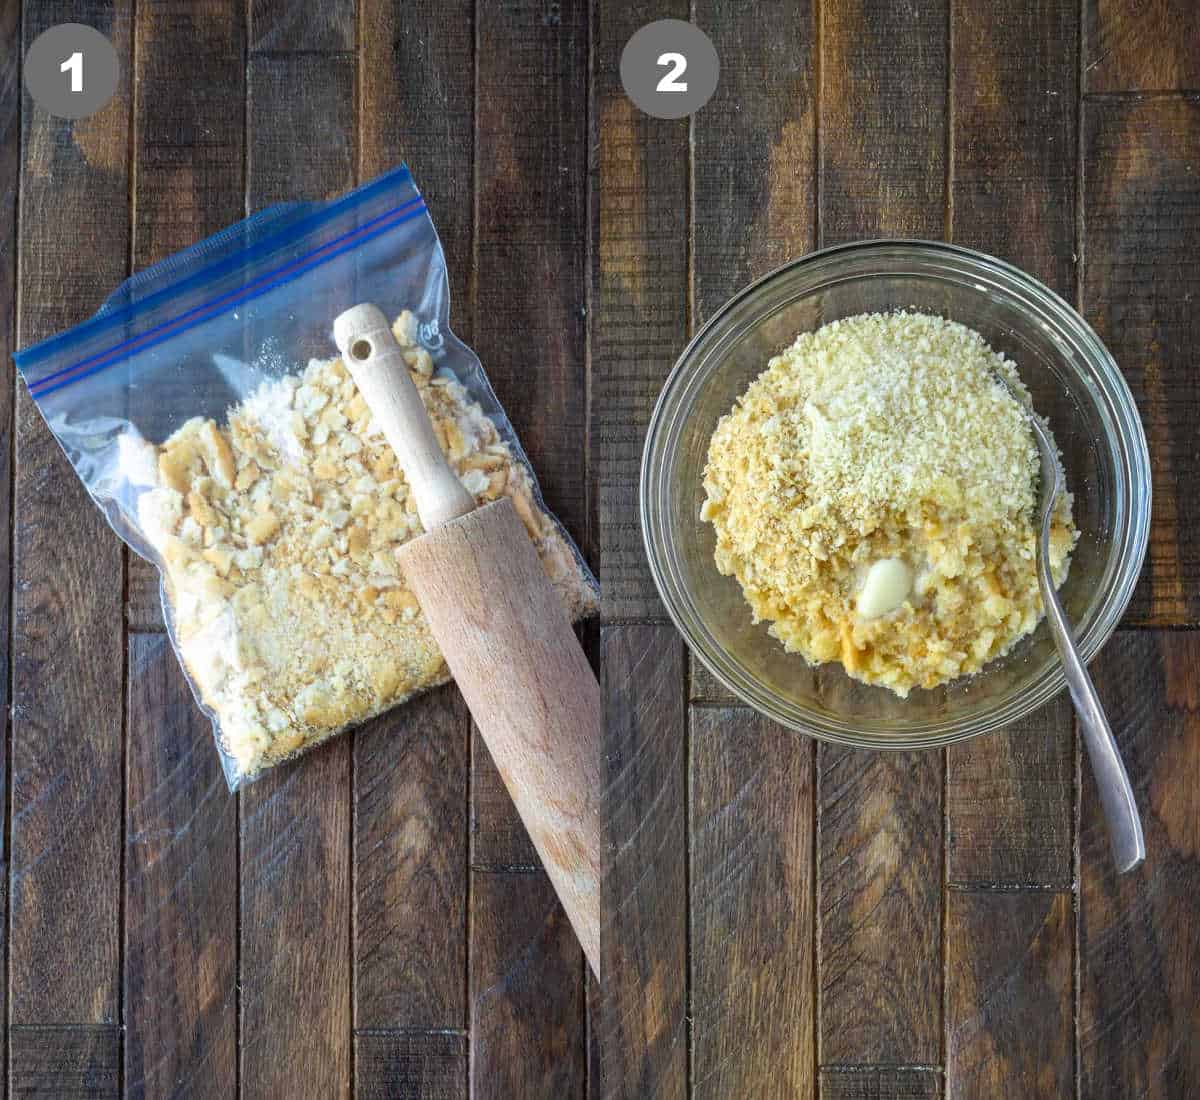 Ritz crackers in a ziplock bag being crushed with a wooden rolling pin.